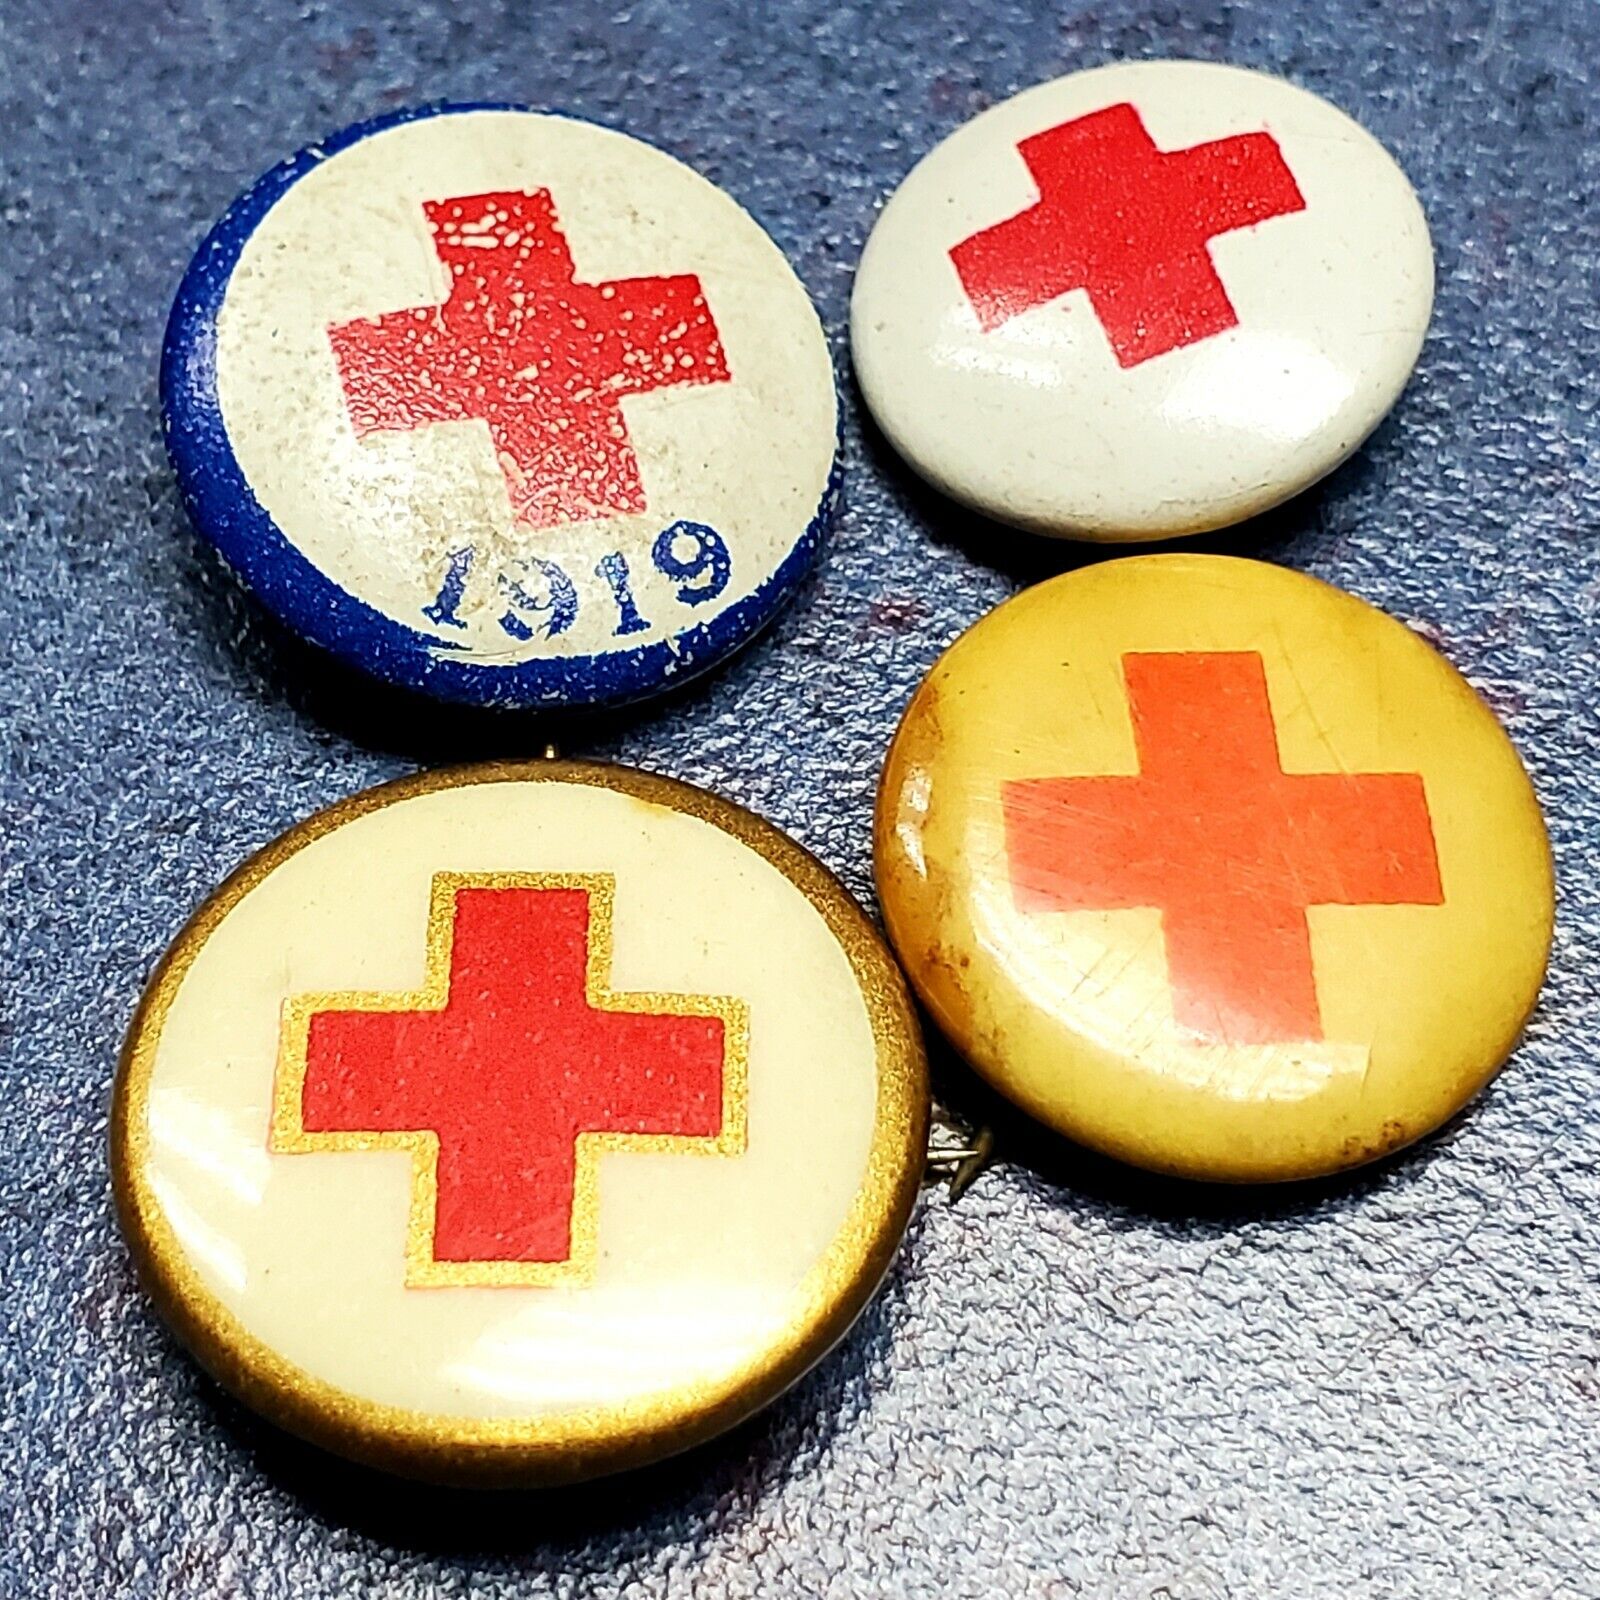 Red Cross - Vintage Early Red Cross Lot of 4 Pinbacks / Buttons / Pins 1919